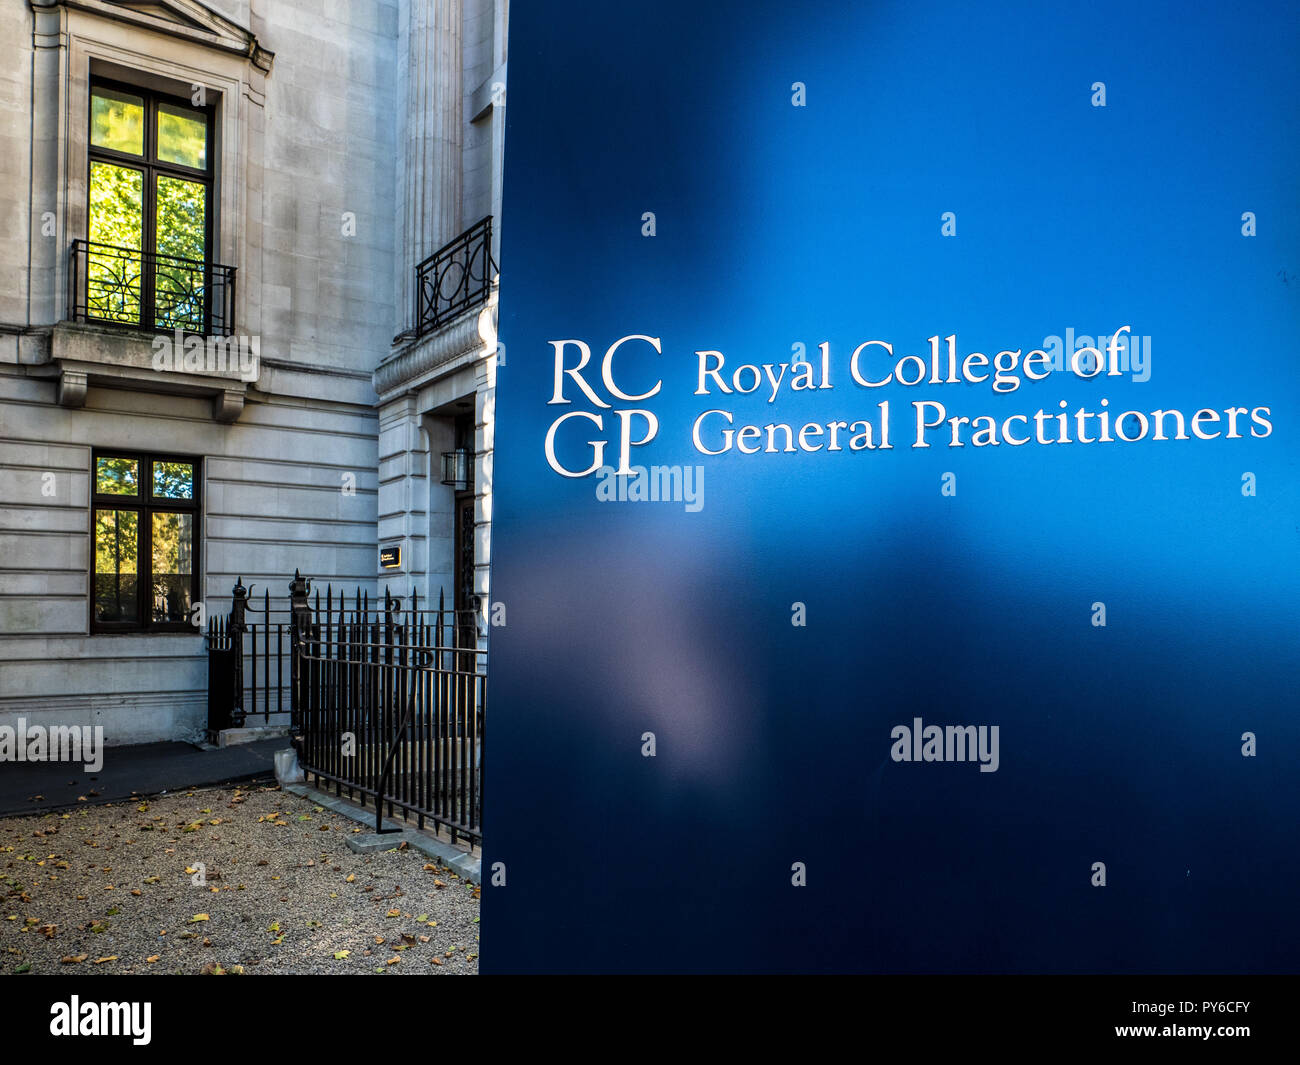 RCGP - The Royal College of General Practitioners (GPs)  in Euston Square central London UK. Royal College of GPs Stock Photo